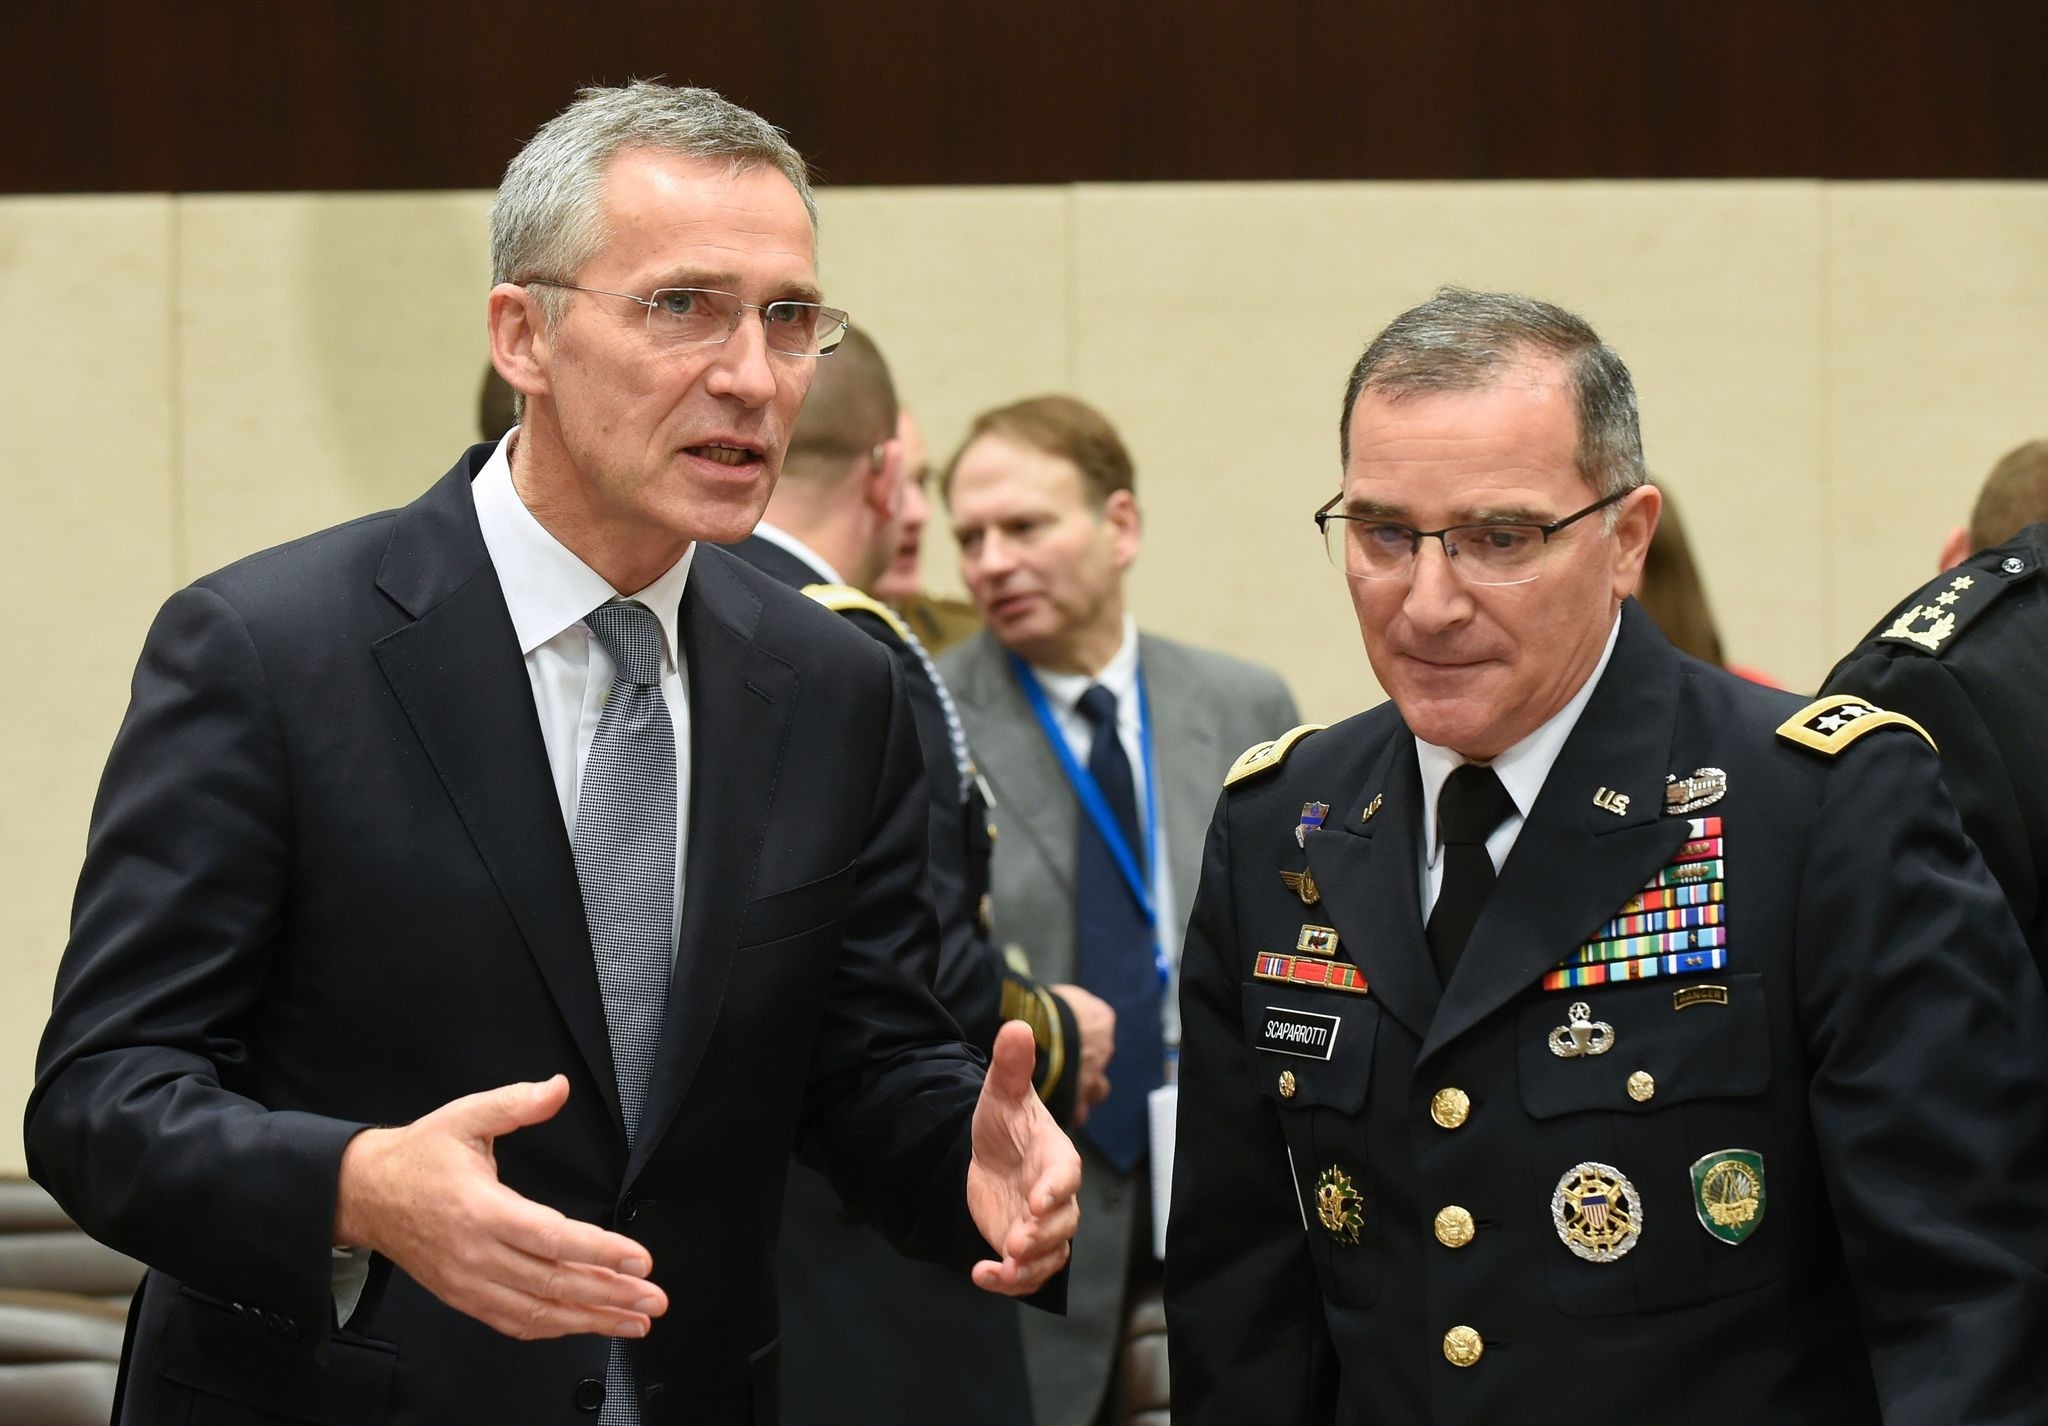 NATO Secretary-General Jens Stoltenberg (L) talks with Supreme Allied Commander Europe of NATO Allied Command Operations Curtis M. Scaparrotti (R) (AFP Photo)